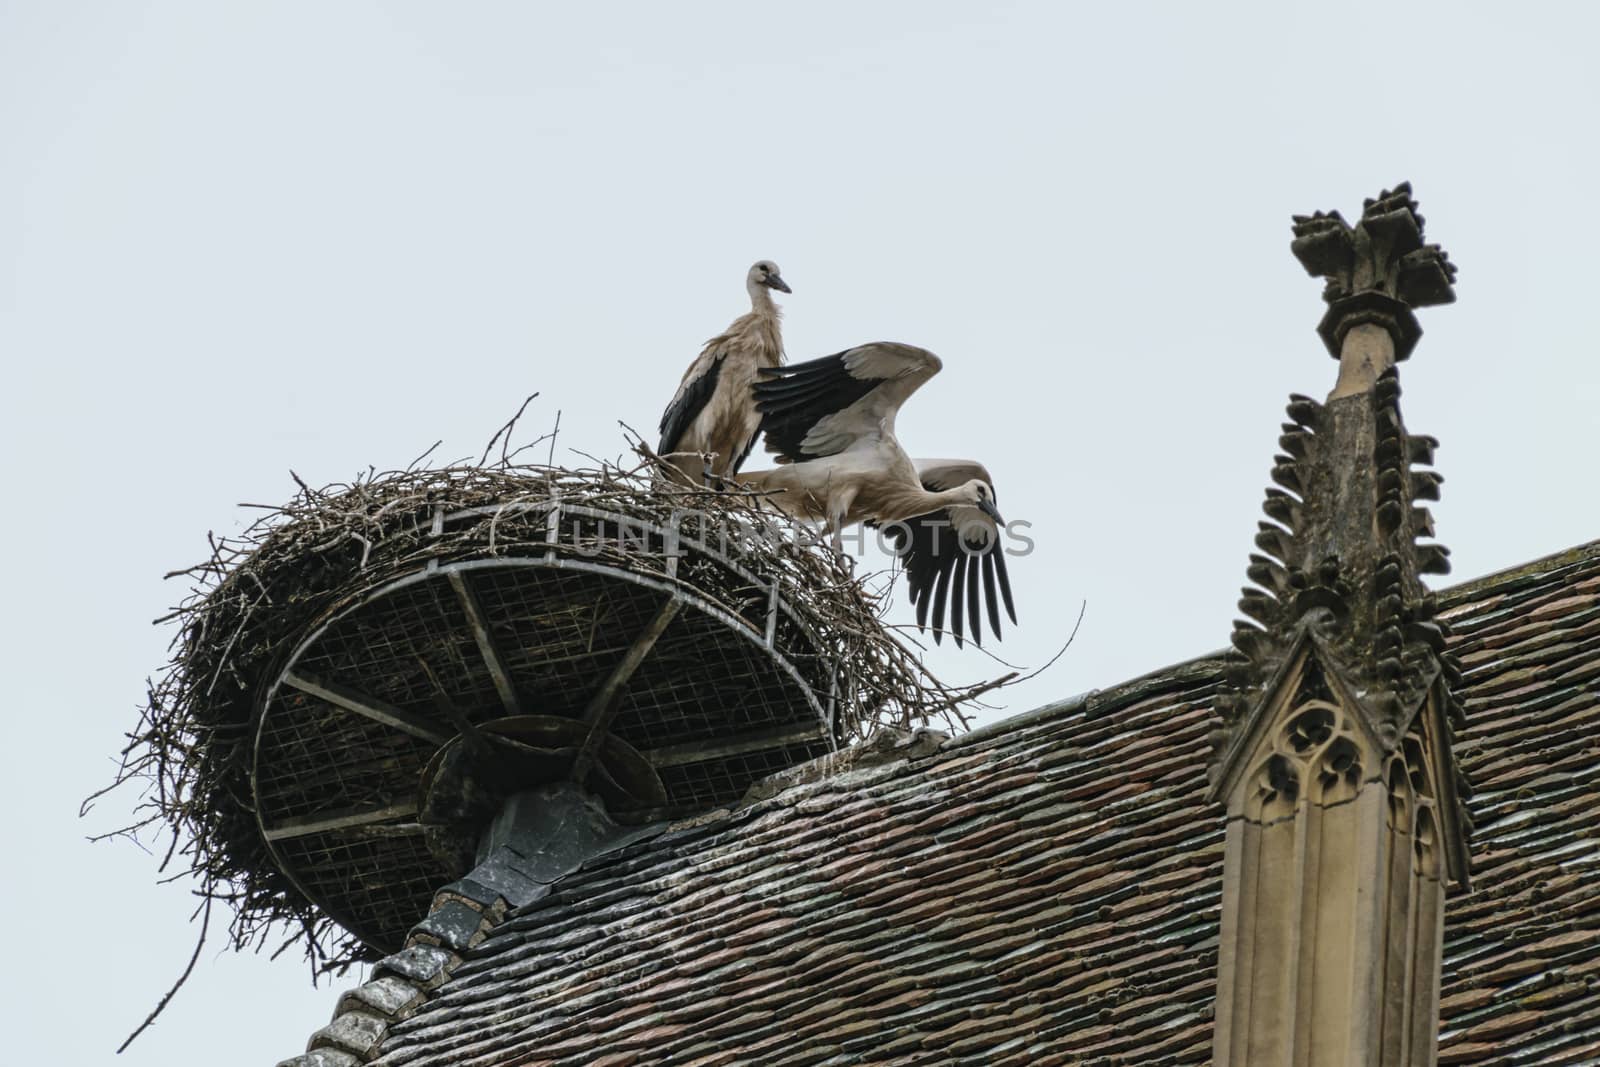 France, Alsace, June 2015: Storks nest on top of a chiurch tower in Colmar